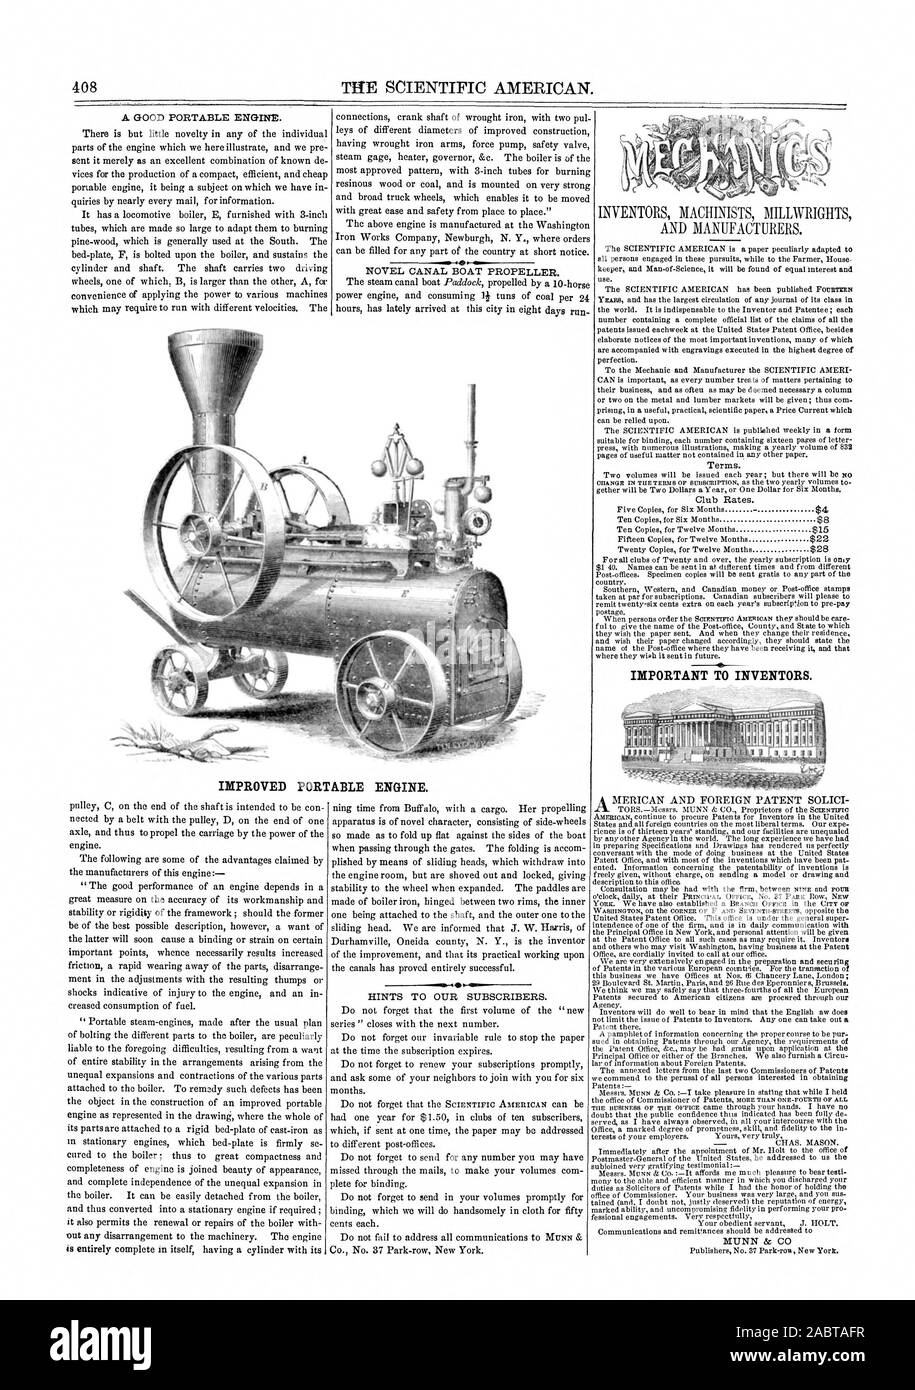 408 TIIE SCIENTIFIC AMERICAN. IMPORTANT TO INVENTORS. IMPROVED PORTABLE ENGINE., 1859-12-17 Stock Photo